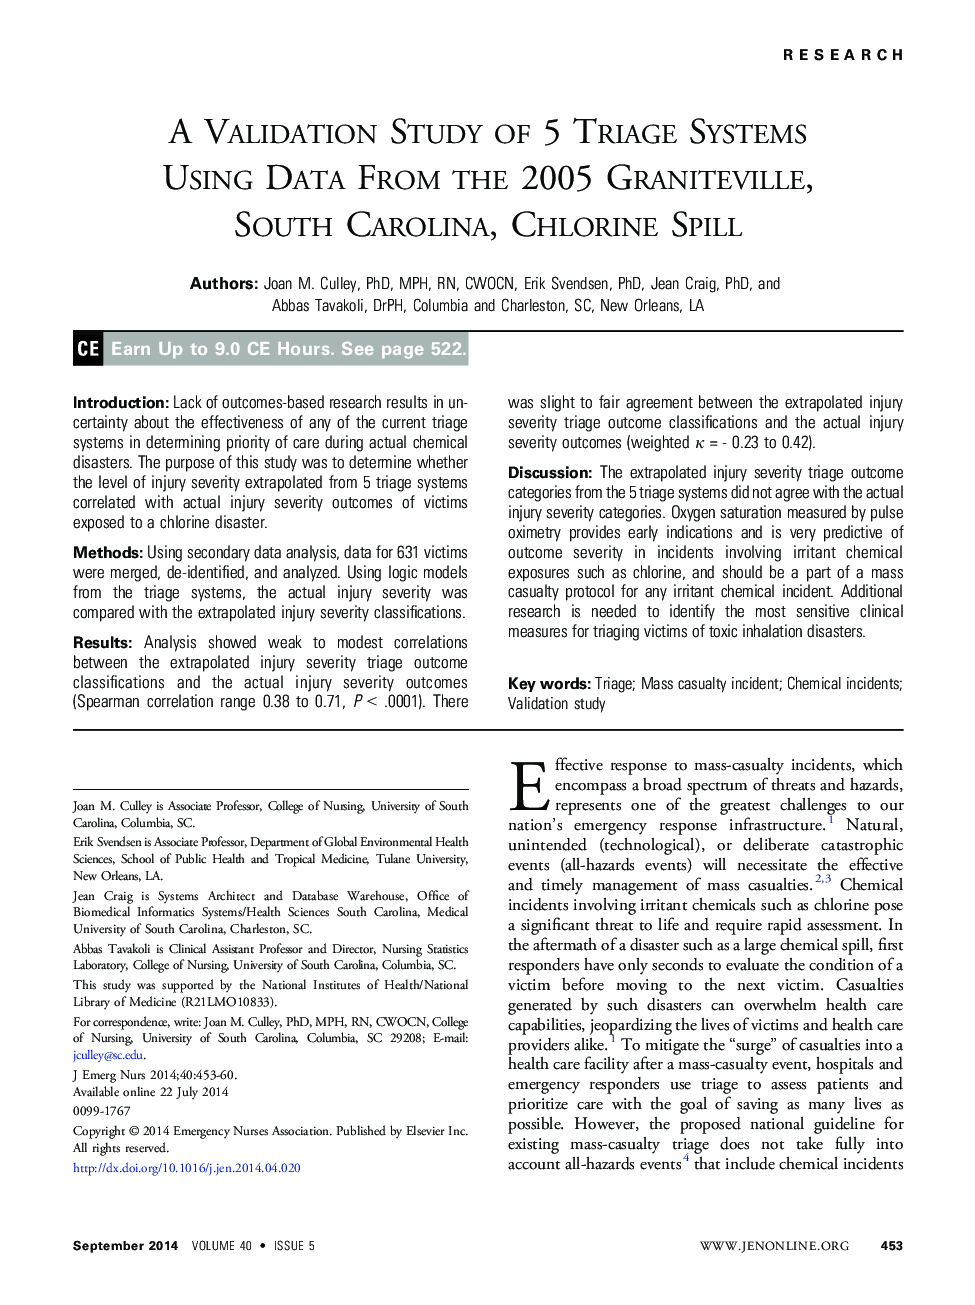 A Validation Study of 5 Triage Systems Using Data From the 2005 Graniteville, South Carolina, Chlorine Spill 